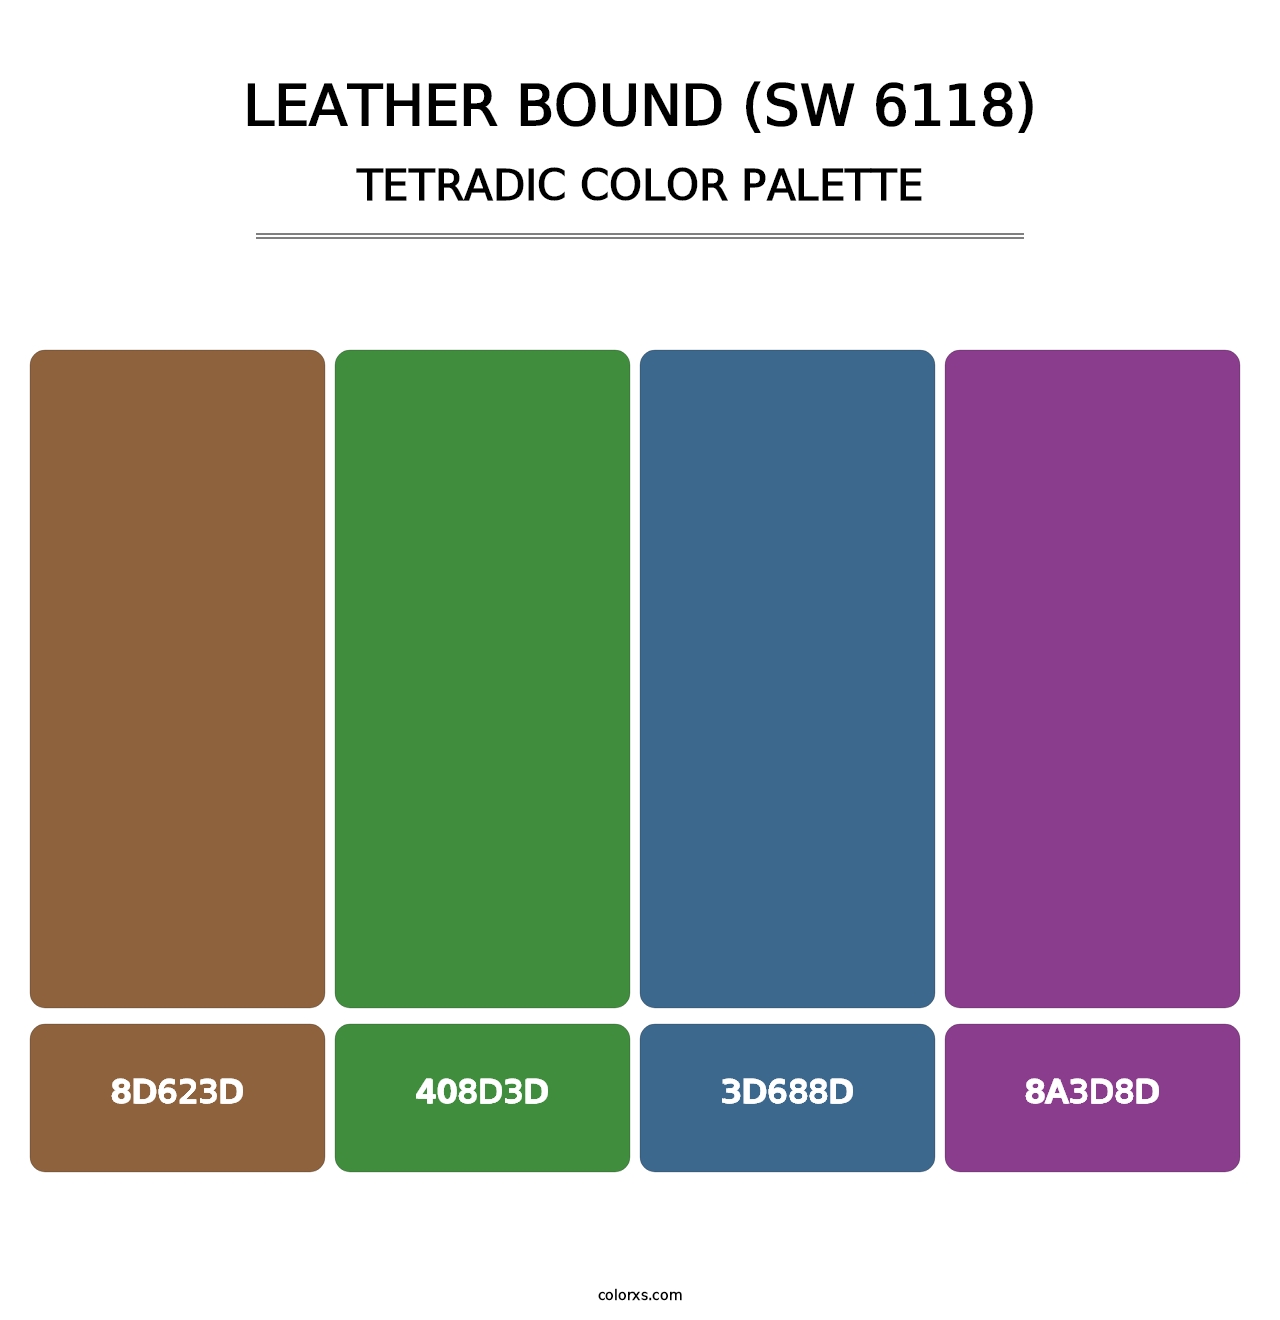 Leather Bound (SW 6118) - Tetradic Color Palette